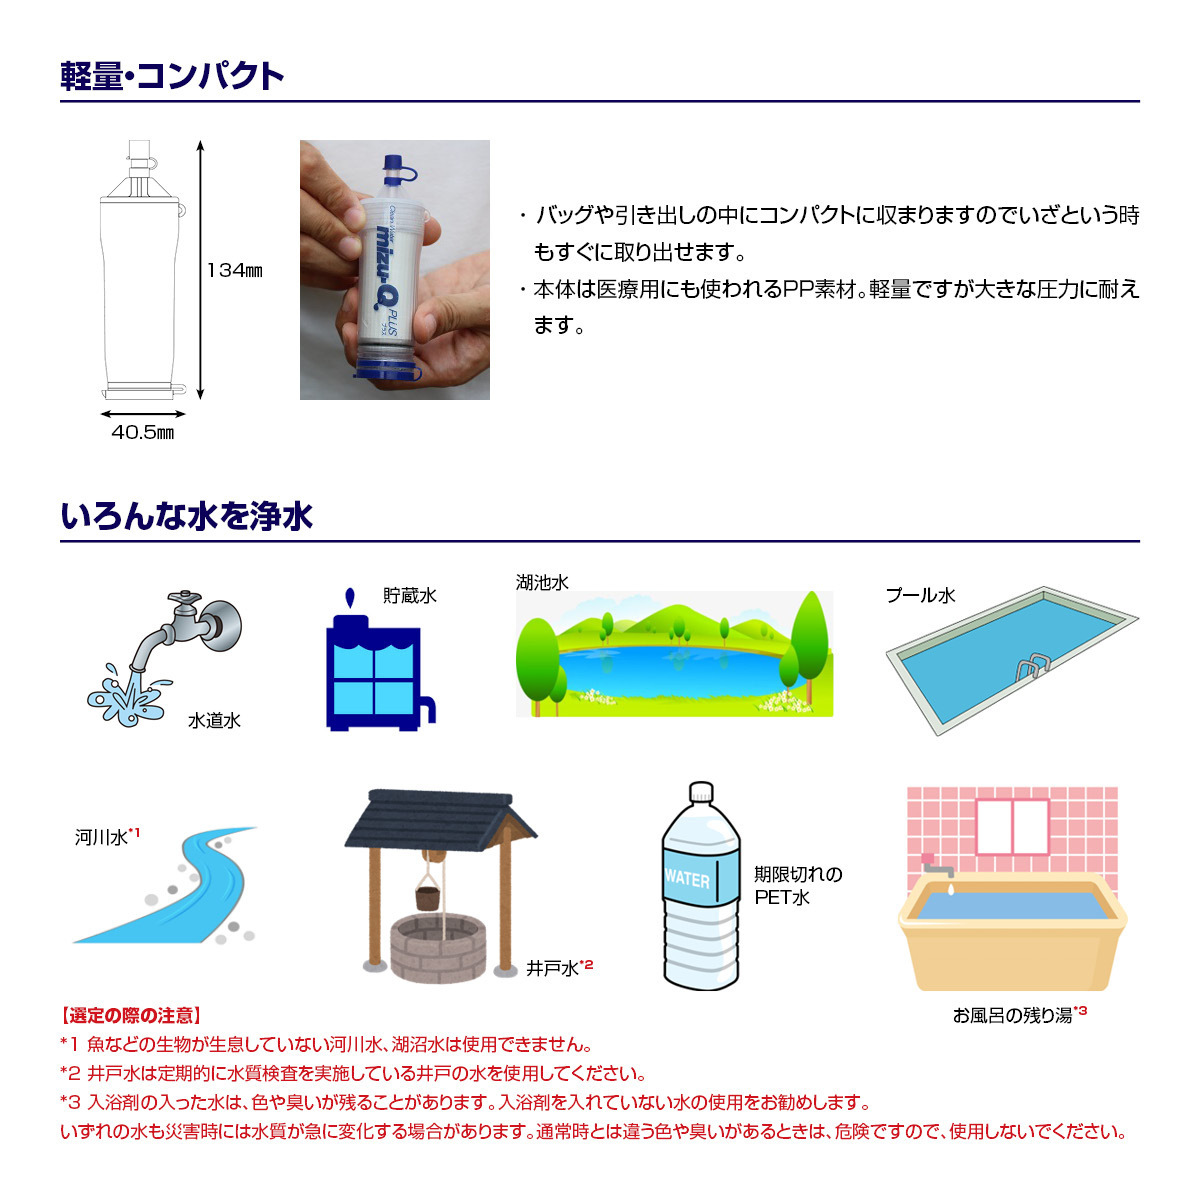 miz cue plus portable water filter mizu-Q PLUS body + exchange cartridge set .. is . factory V disaster prevention disaster outdoor traveling abroad drinking water filtration made in Japan free shipping 